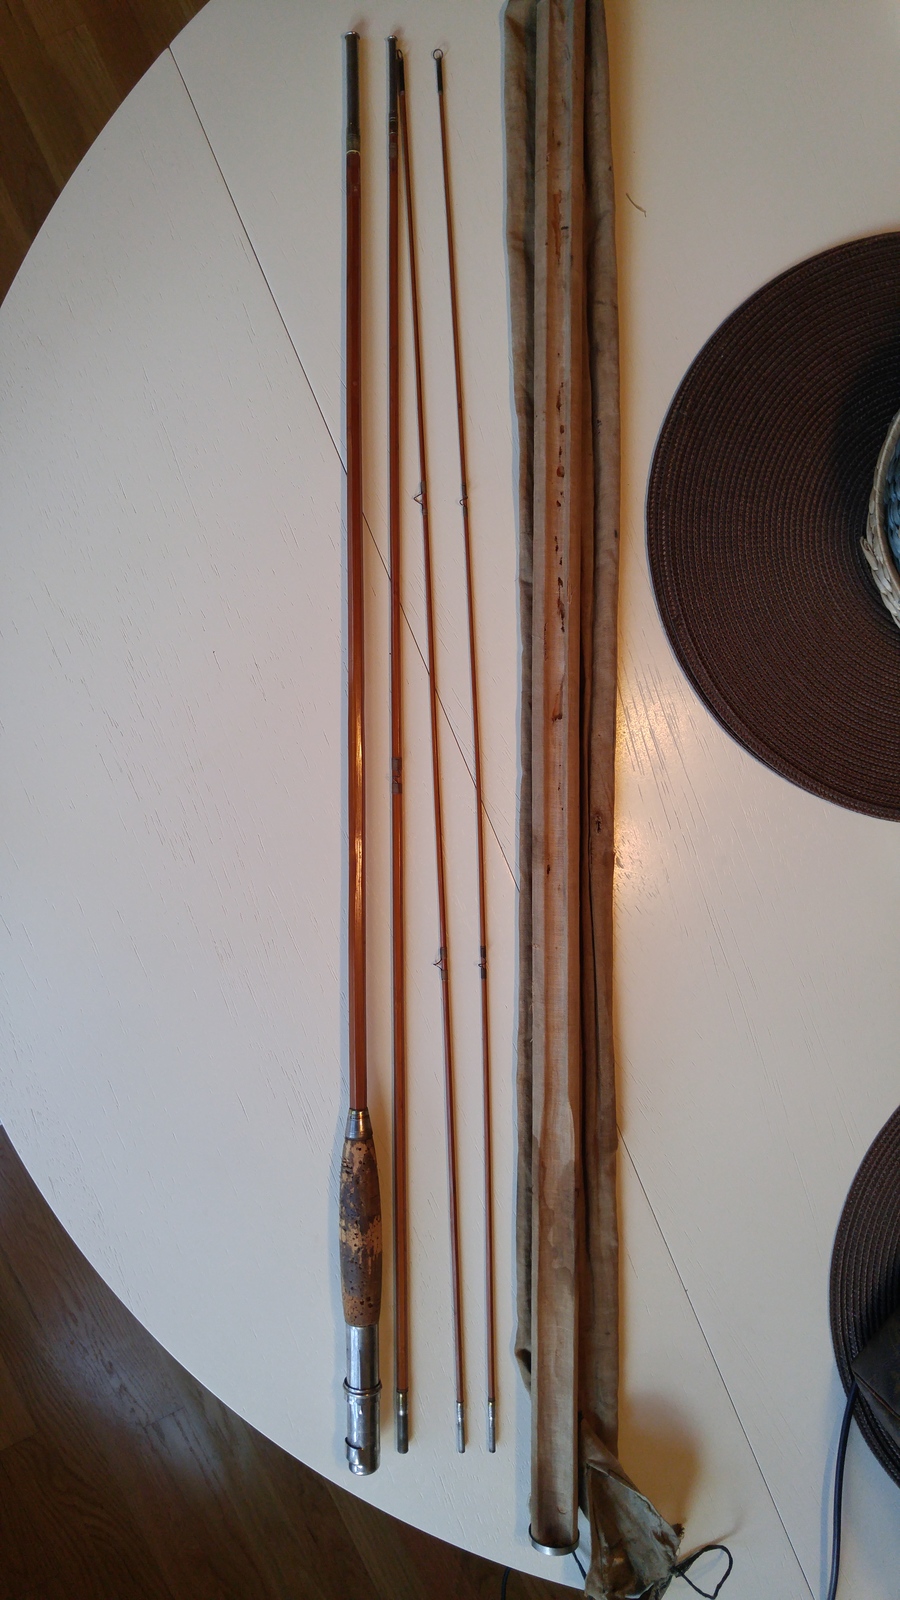 Vintage Bamboo Fly Rod Identification